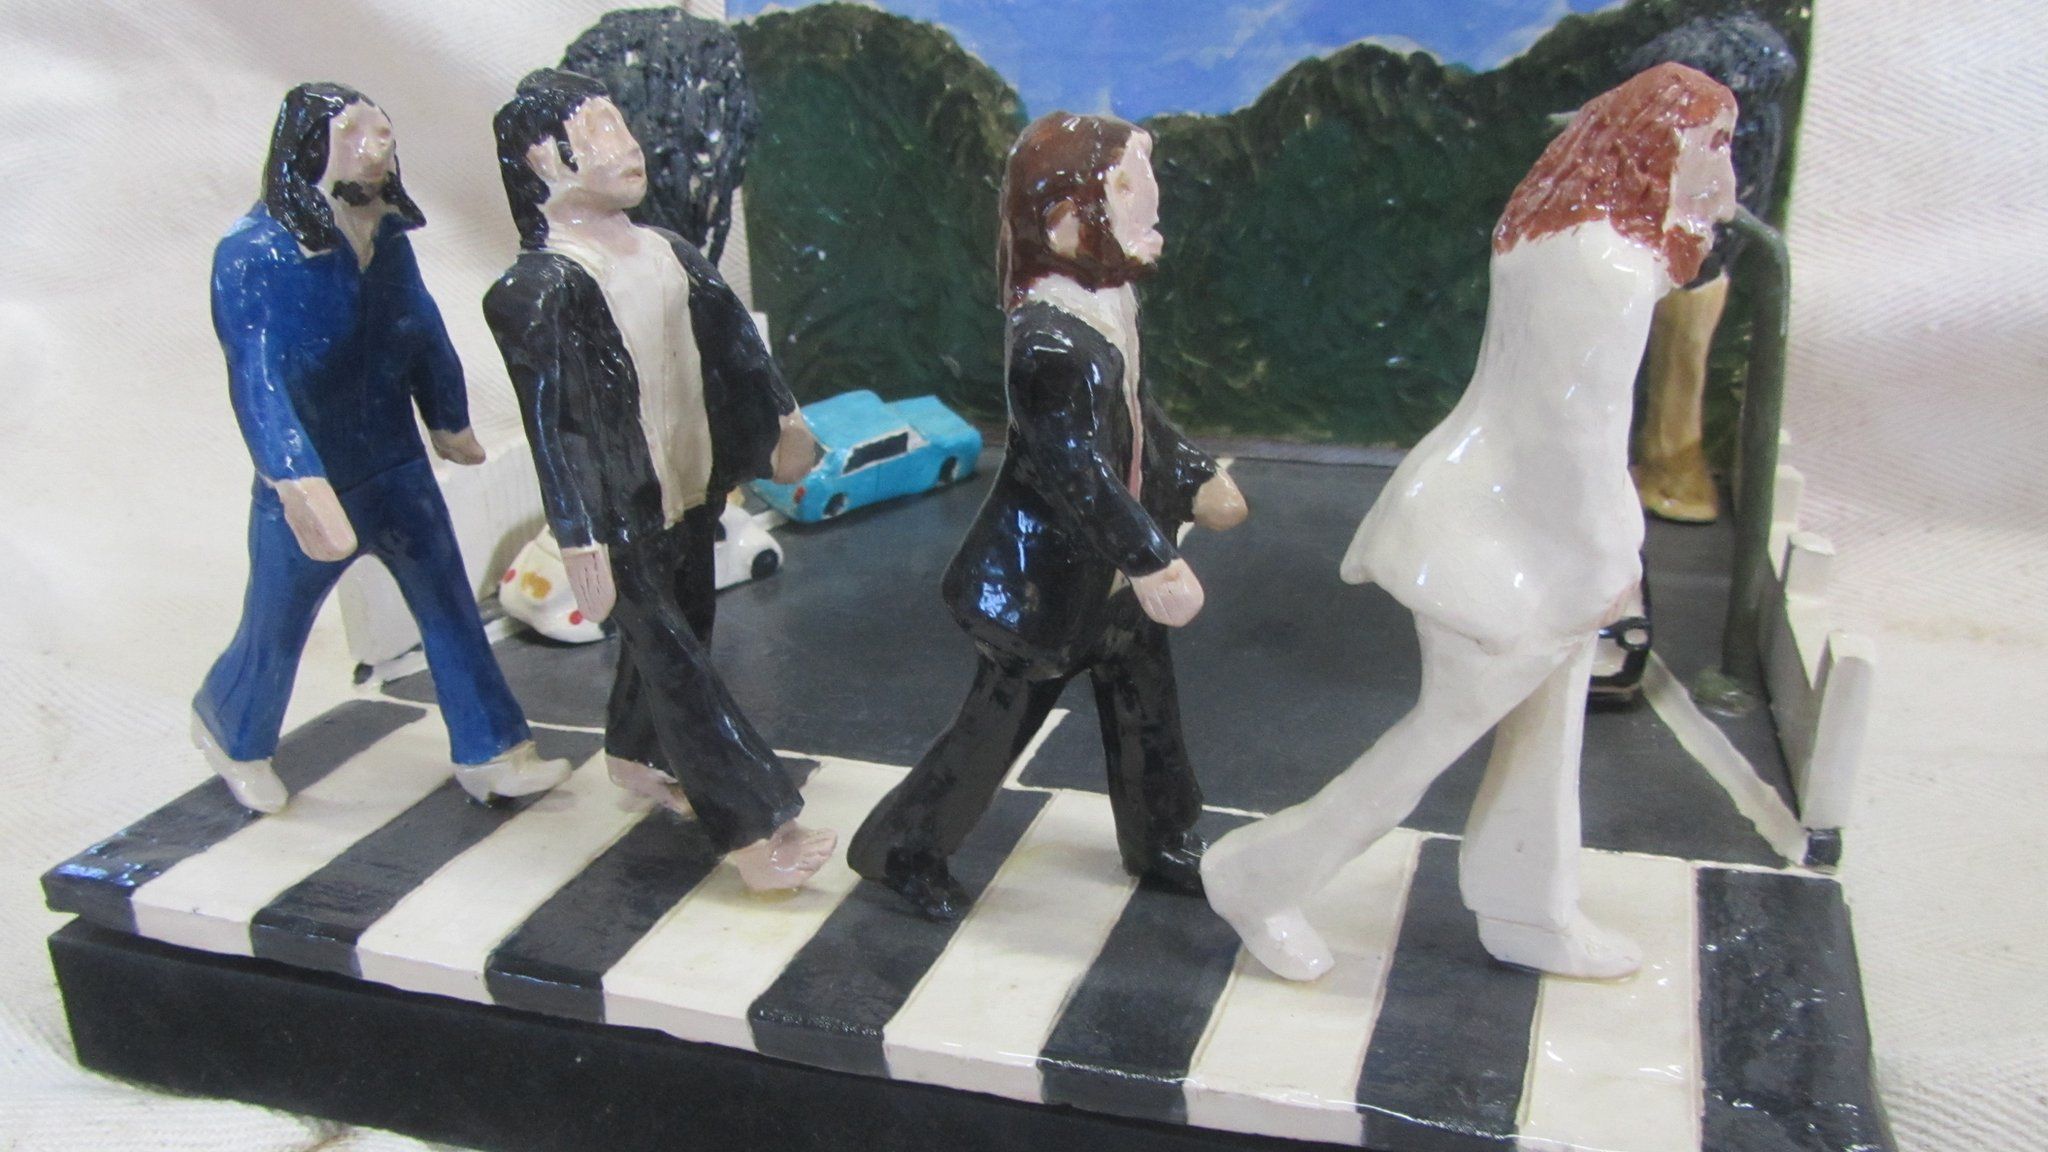 Ceramic version of Abbey Road by The Beatles